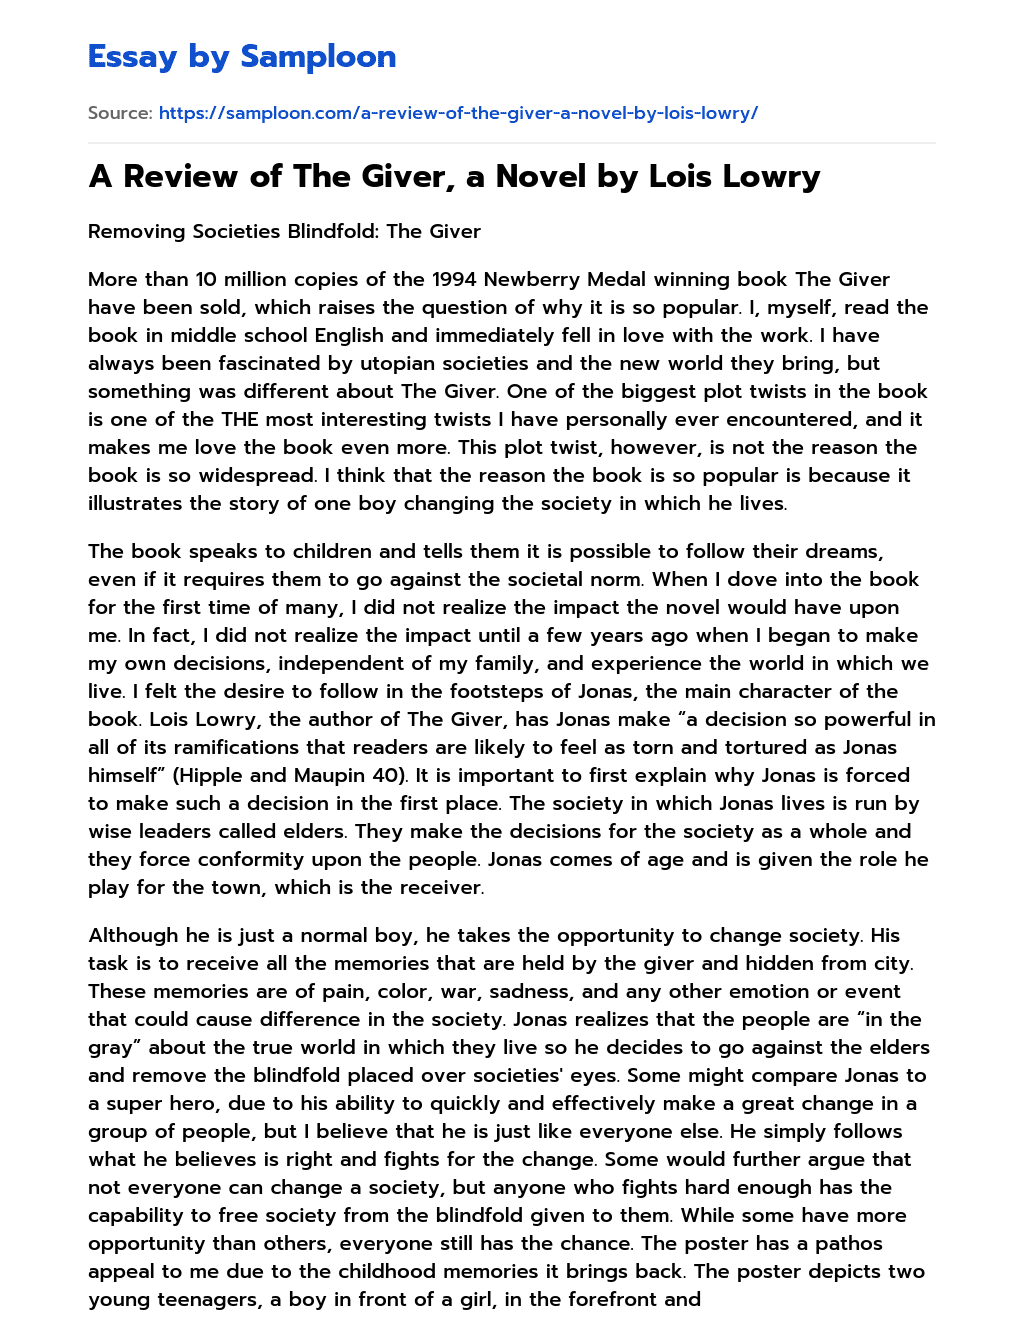 A Review of The Giver, a Novel by Lois Lowry essay